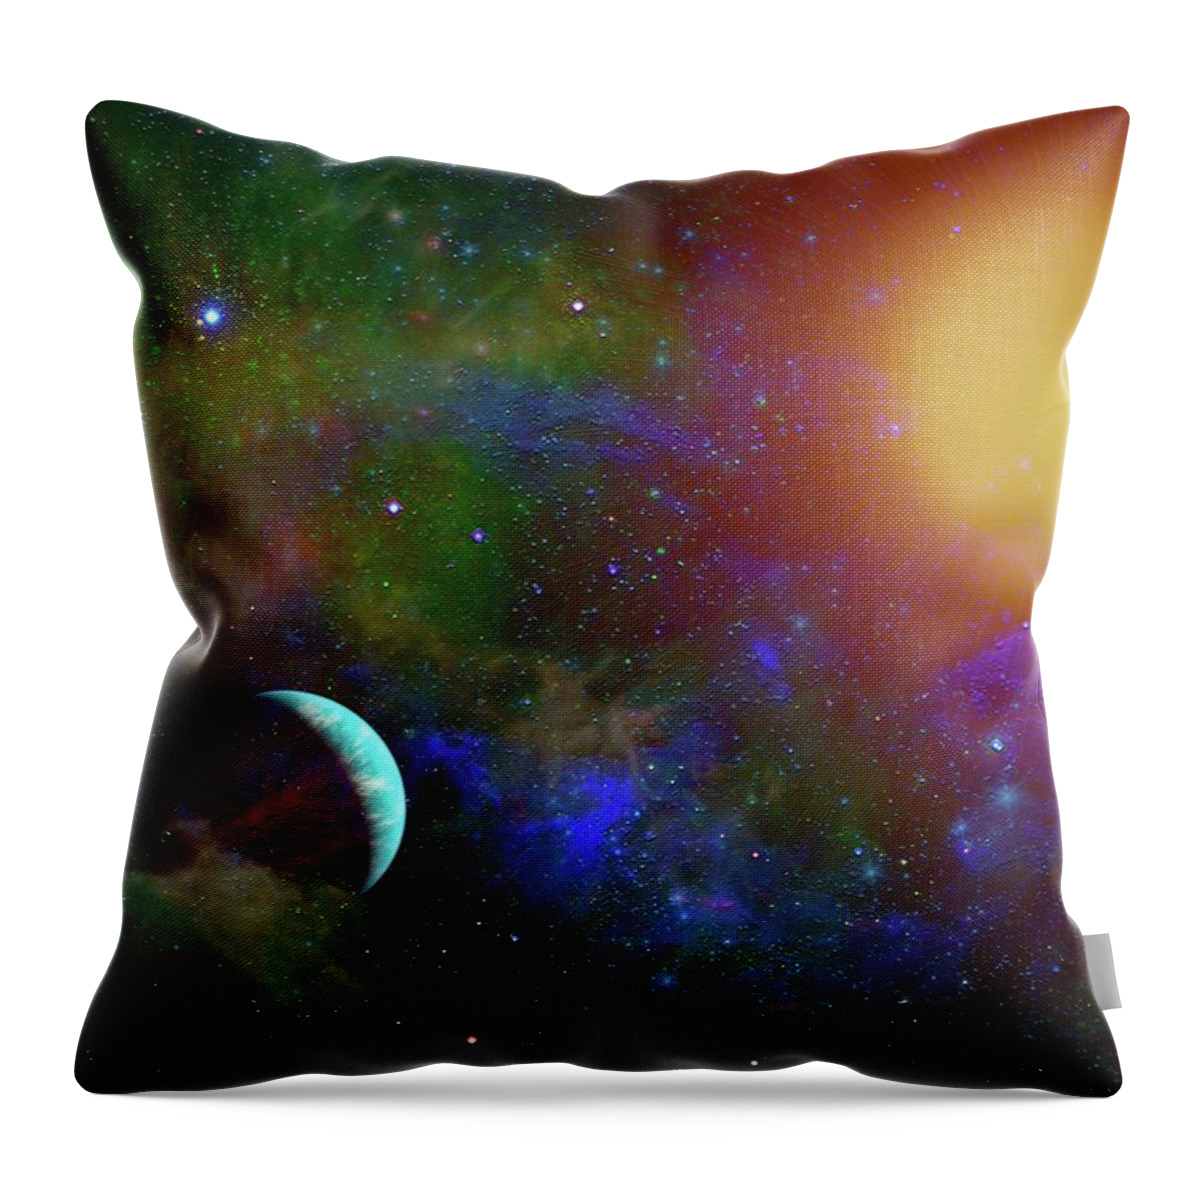  Throw Pillow featuring the digital art A Sun Going Red Giant by Don White Artdreamer